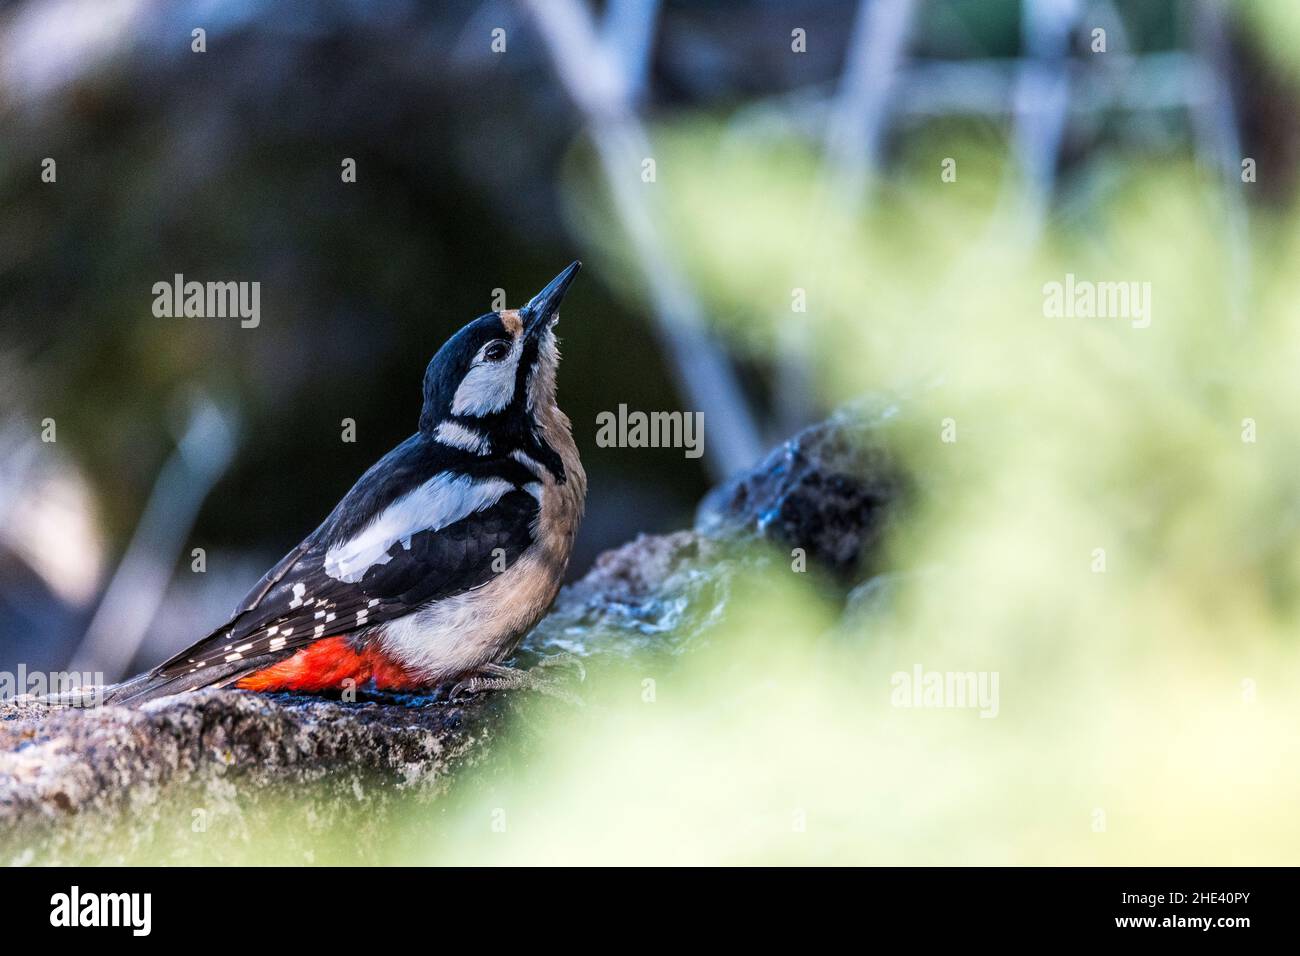 Great spotted woodpecker of the canariensis subspecies (Dendrocopos major canariensis) photographed in Tenerife, at the edge of a water point. Stock Photo